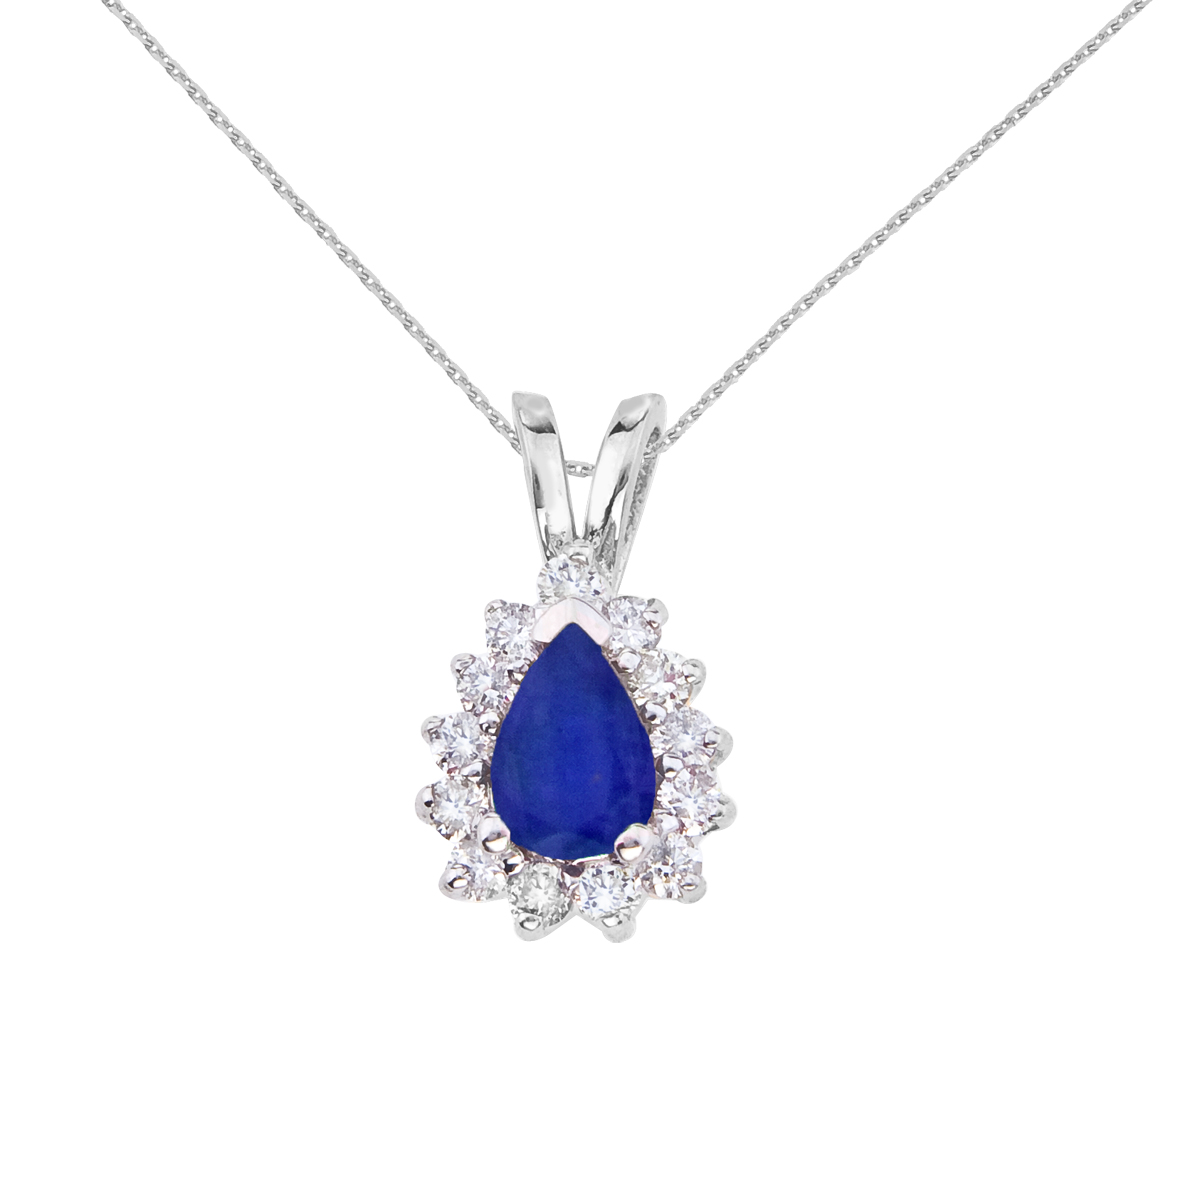 6x4 mm oval natural sapphire pendant accented with bright diamonds set in 14k white gold.